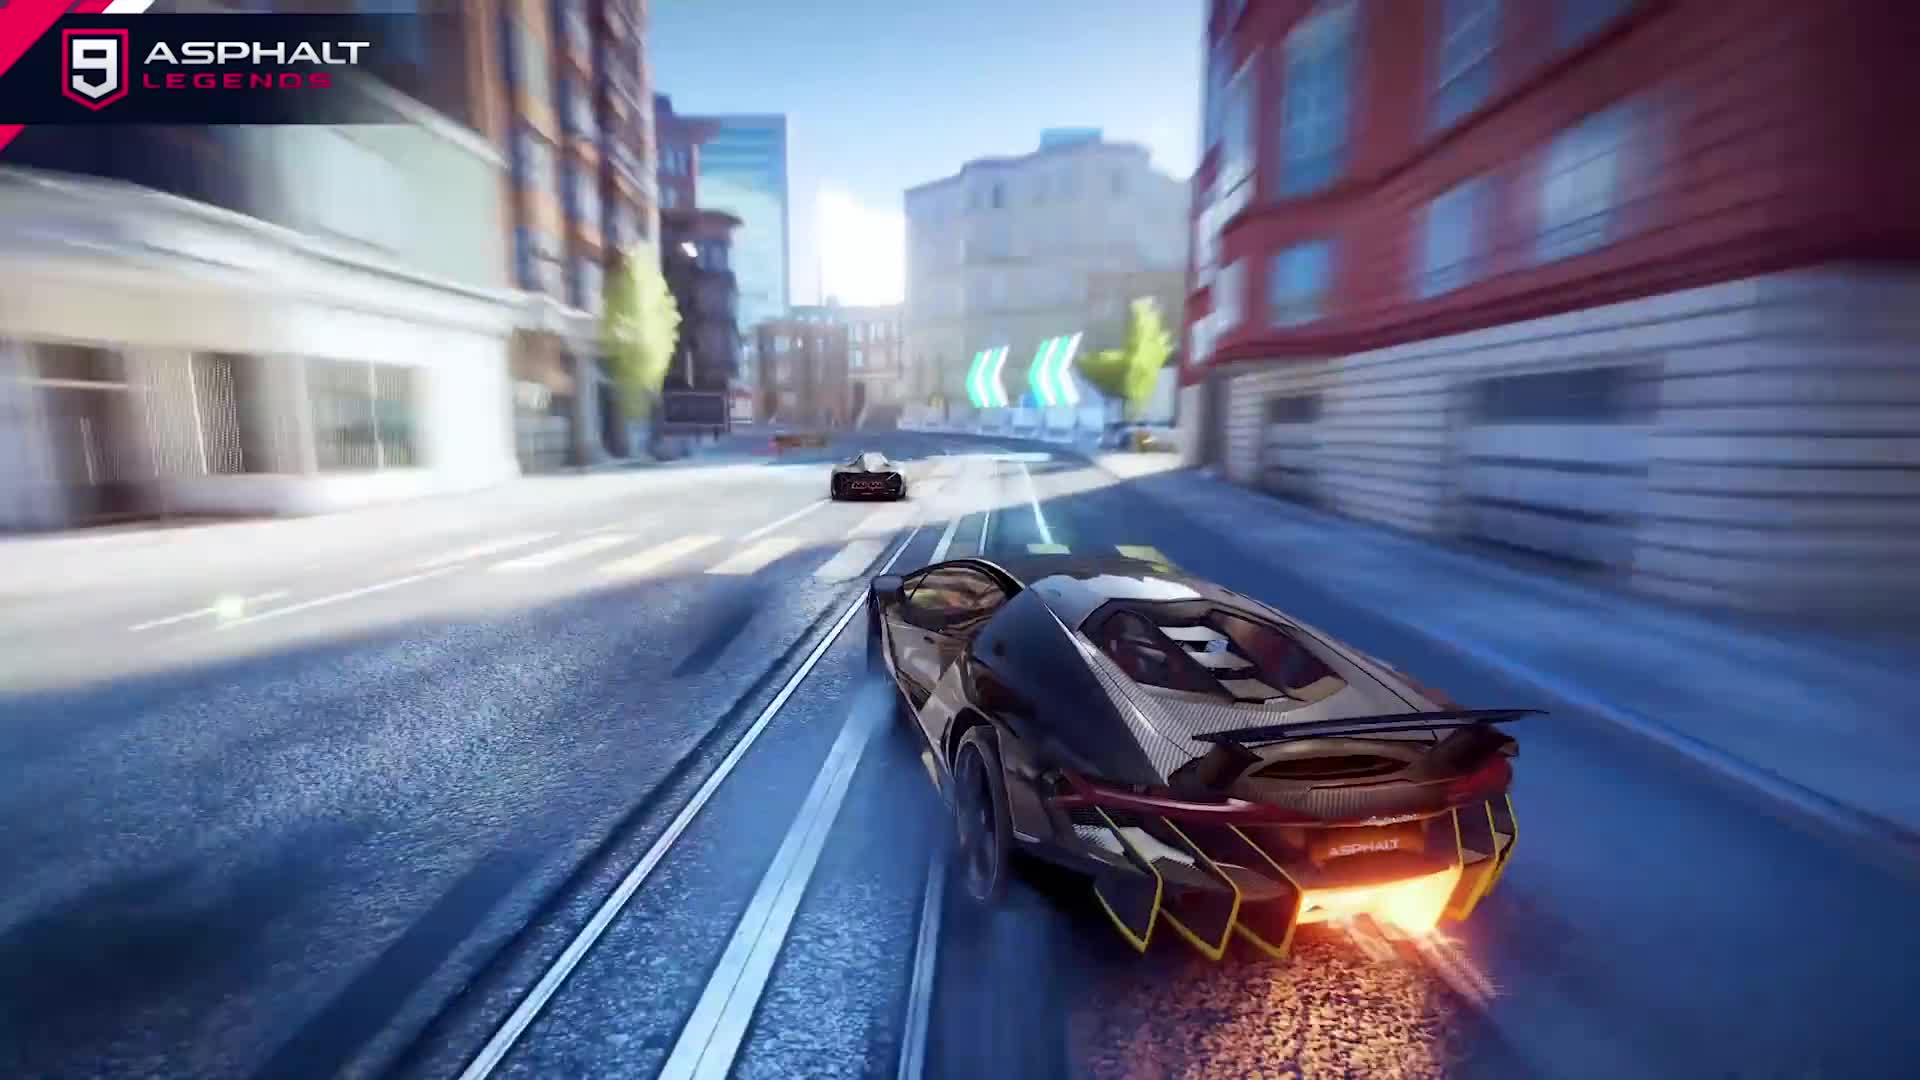 Asphalt 9: Legends shows high visual quality for a mobile game | Feed4gamers